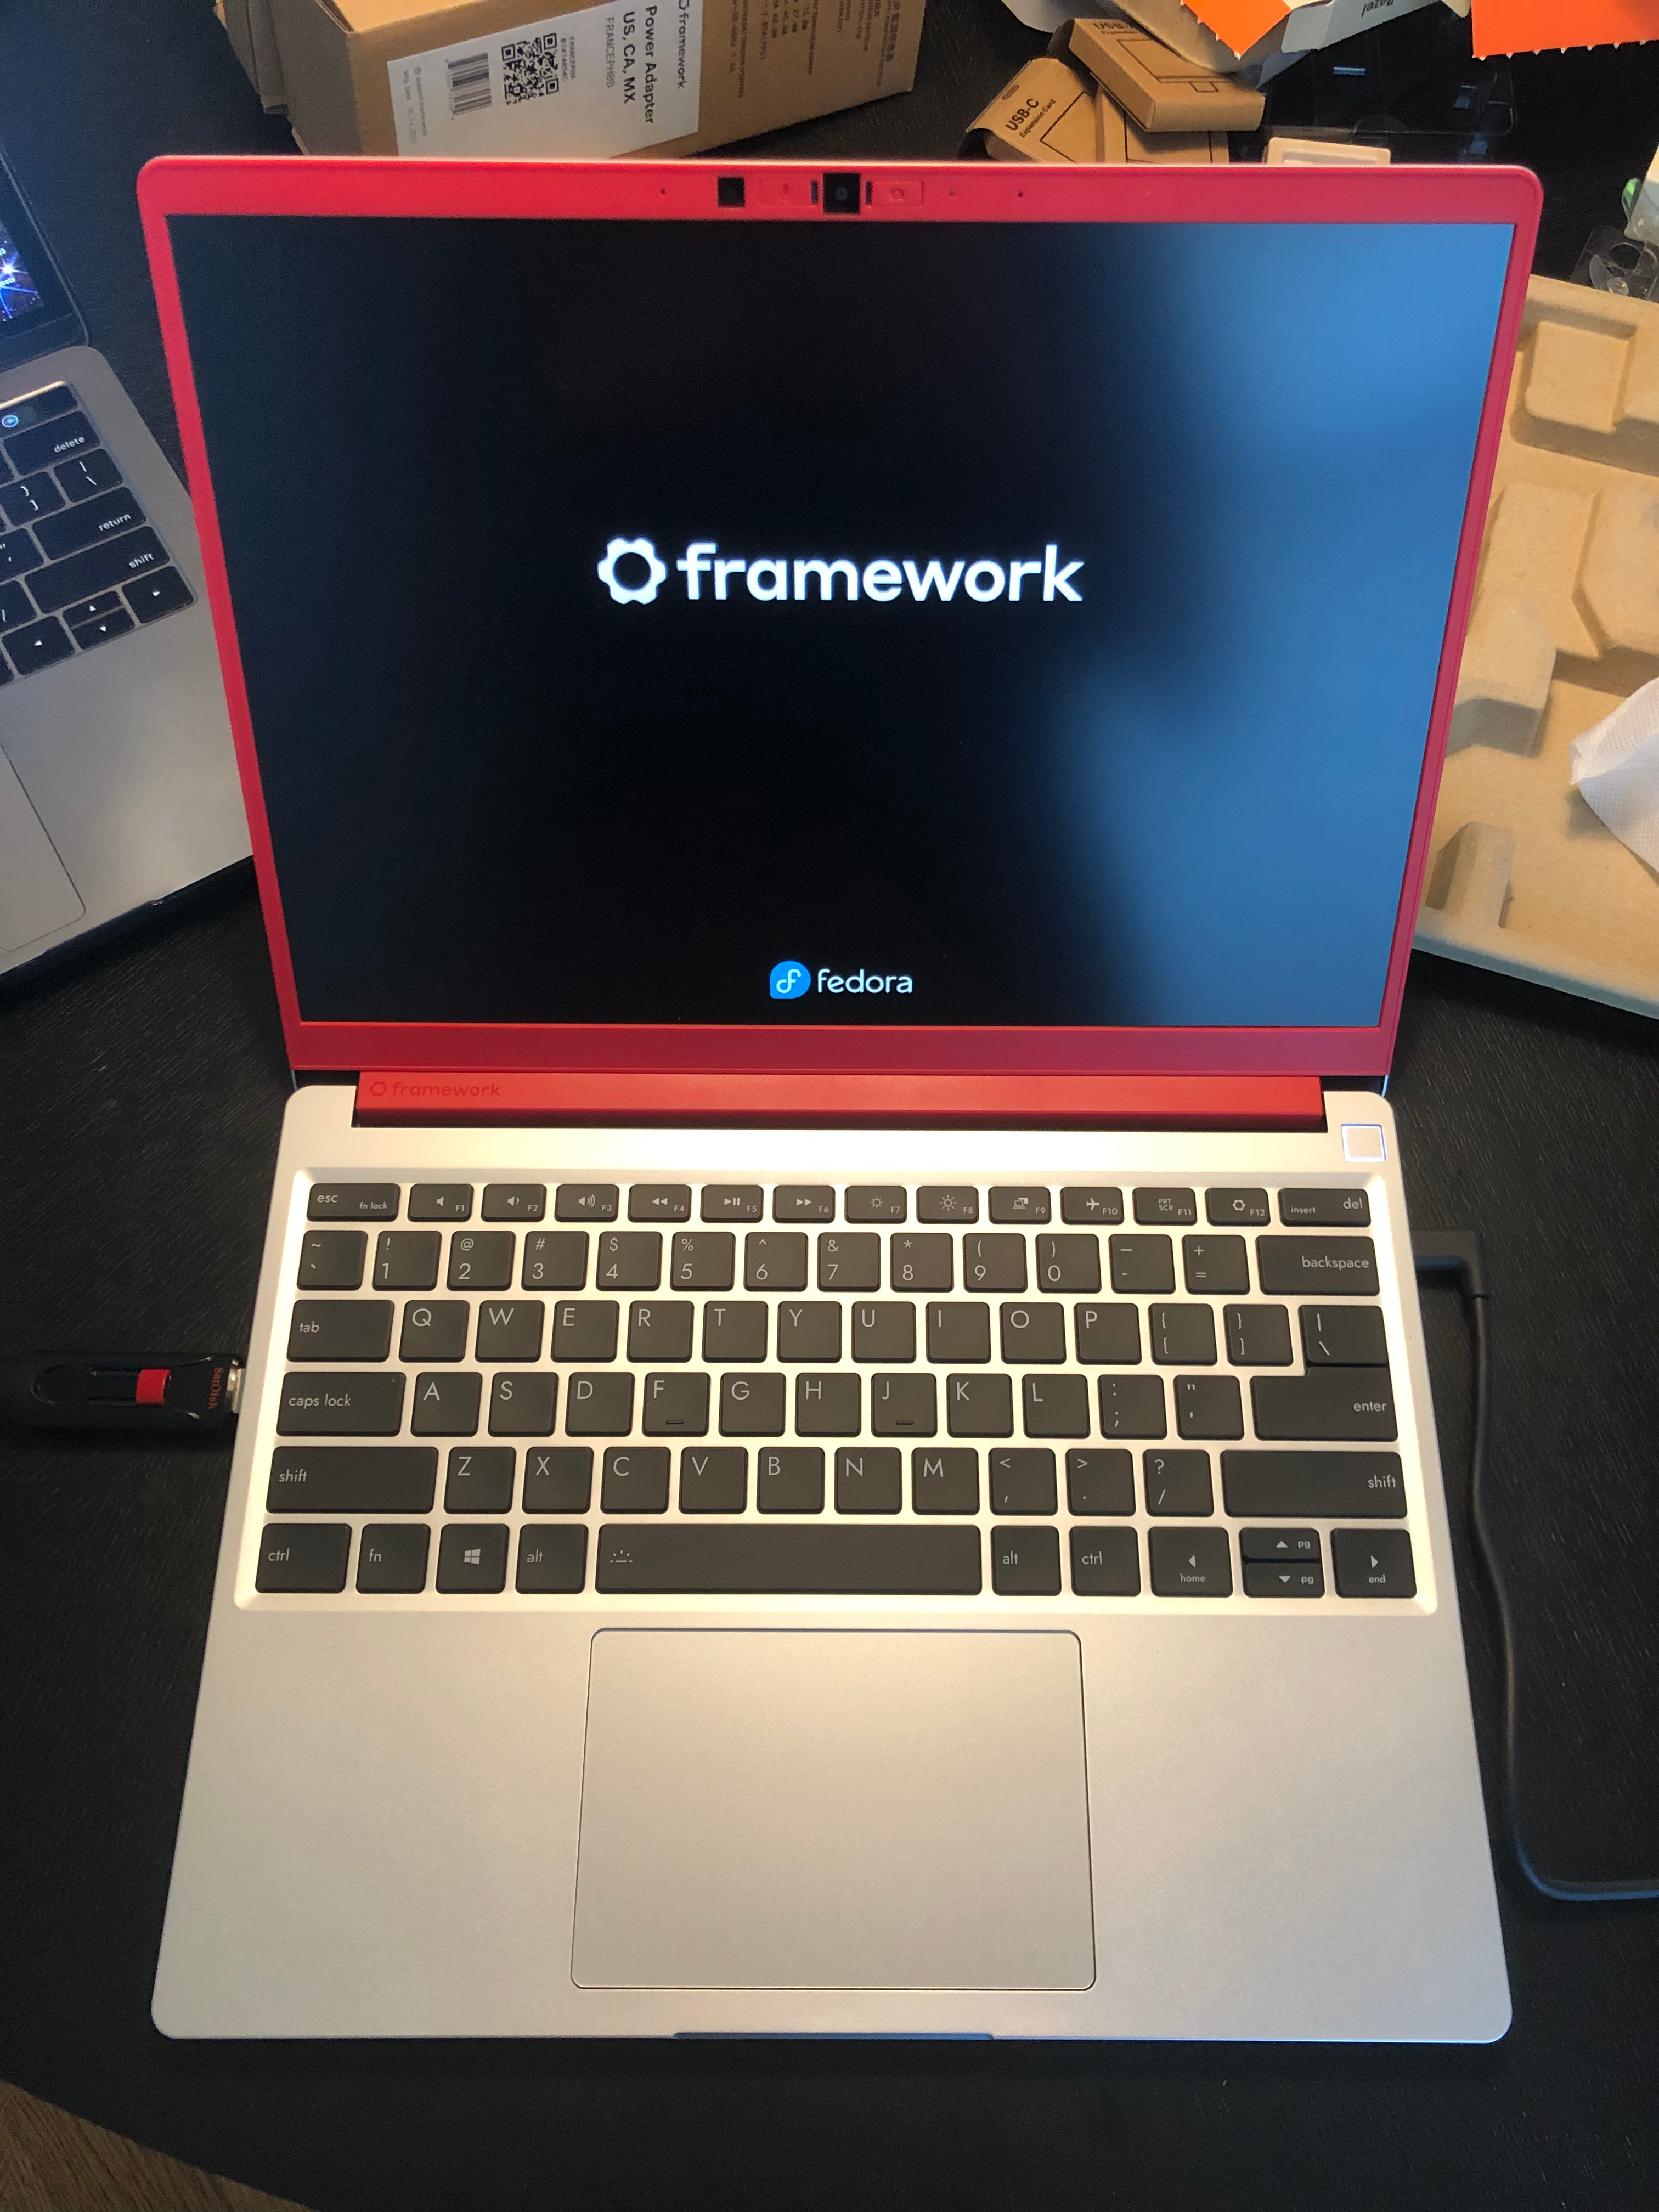 completed build of framework laptop 13 with red bezel